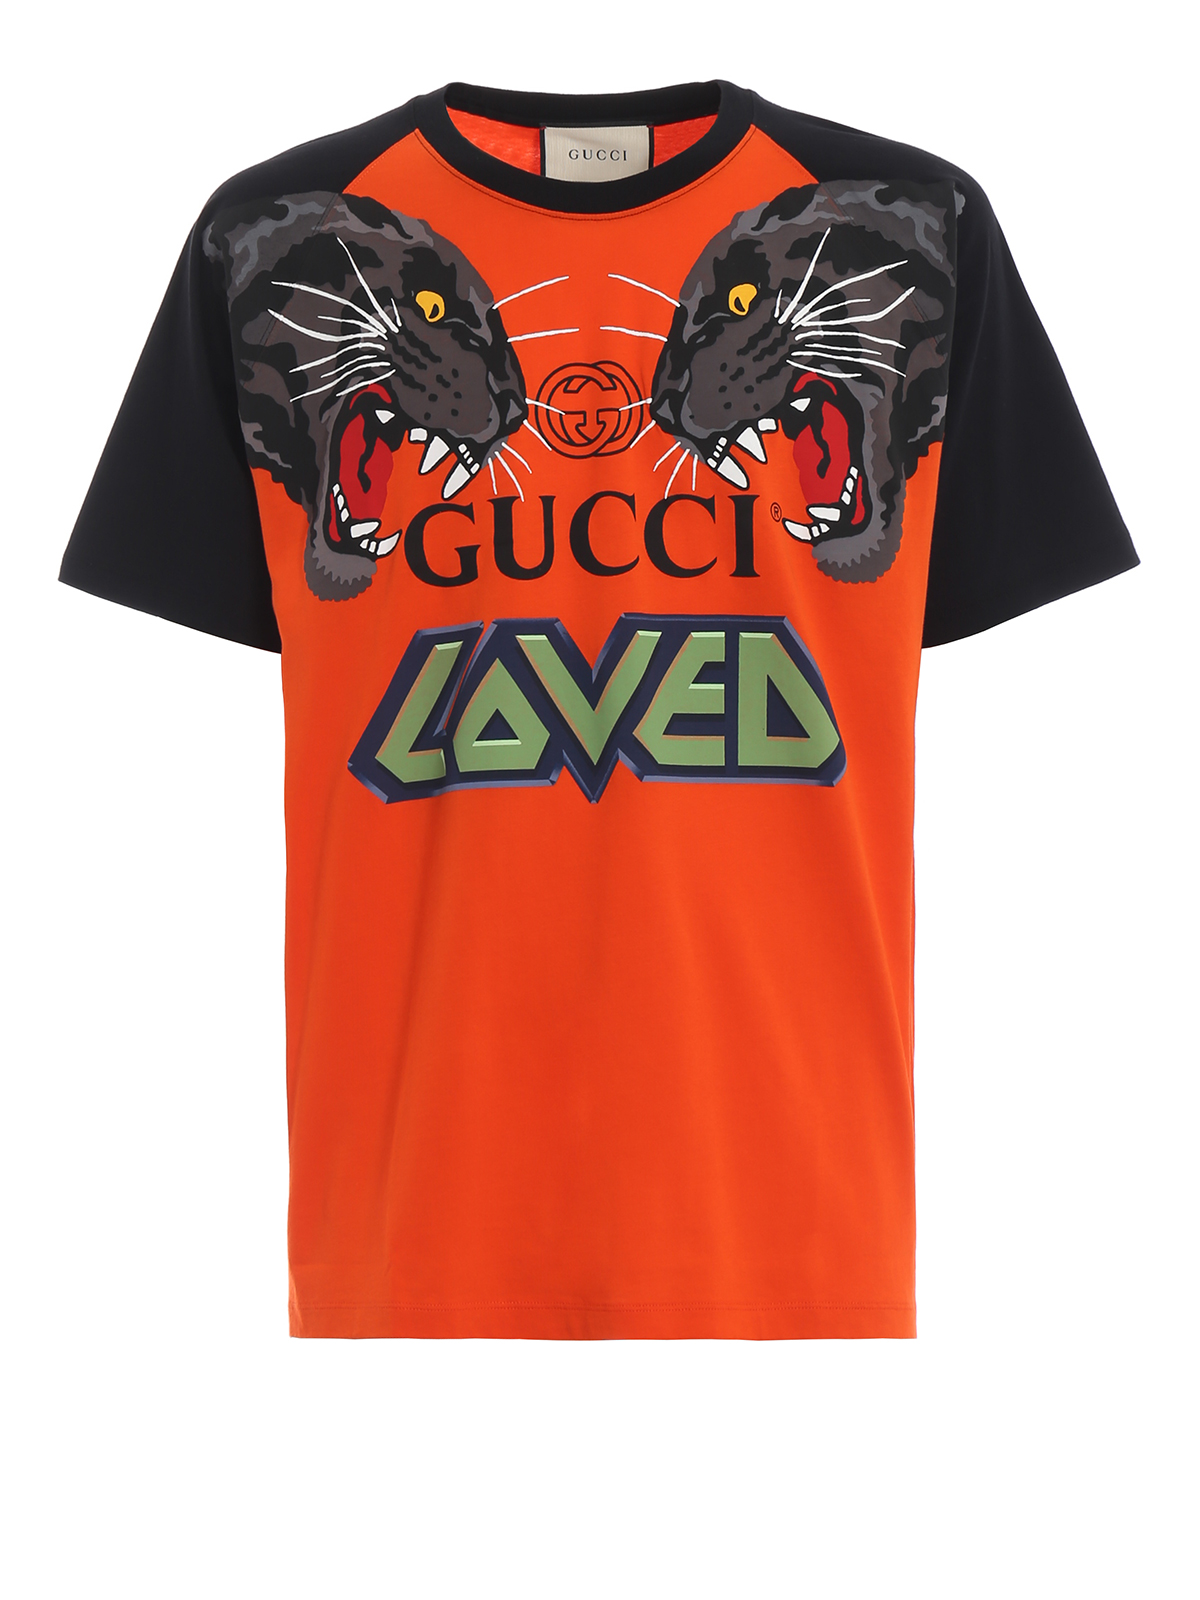 Camisetas Gucci - Gucci Loved - 549099XJAI17252 |